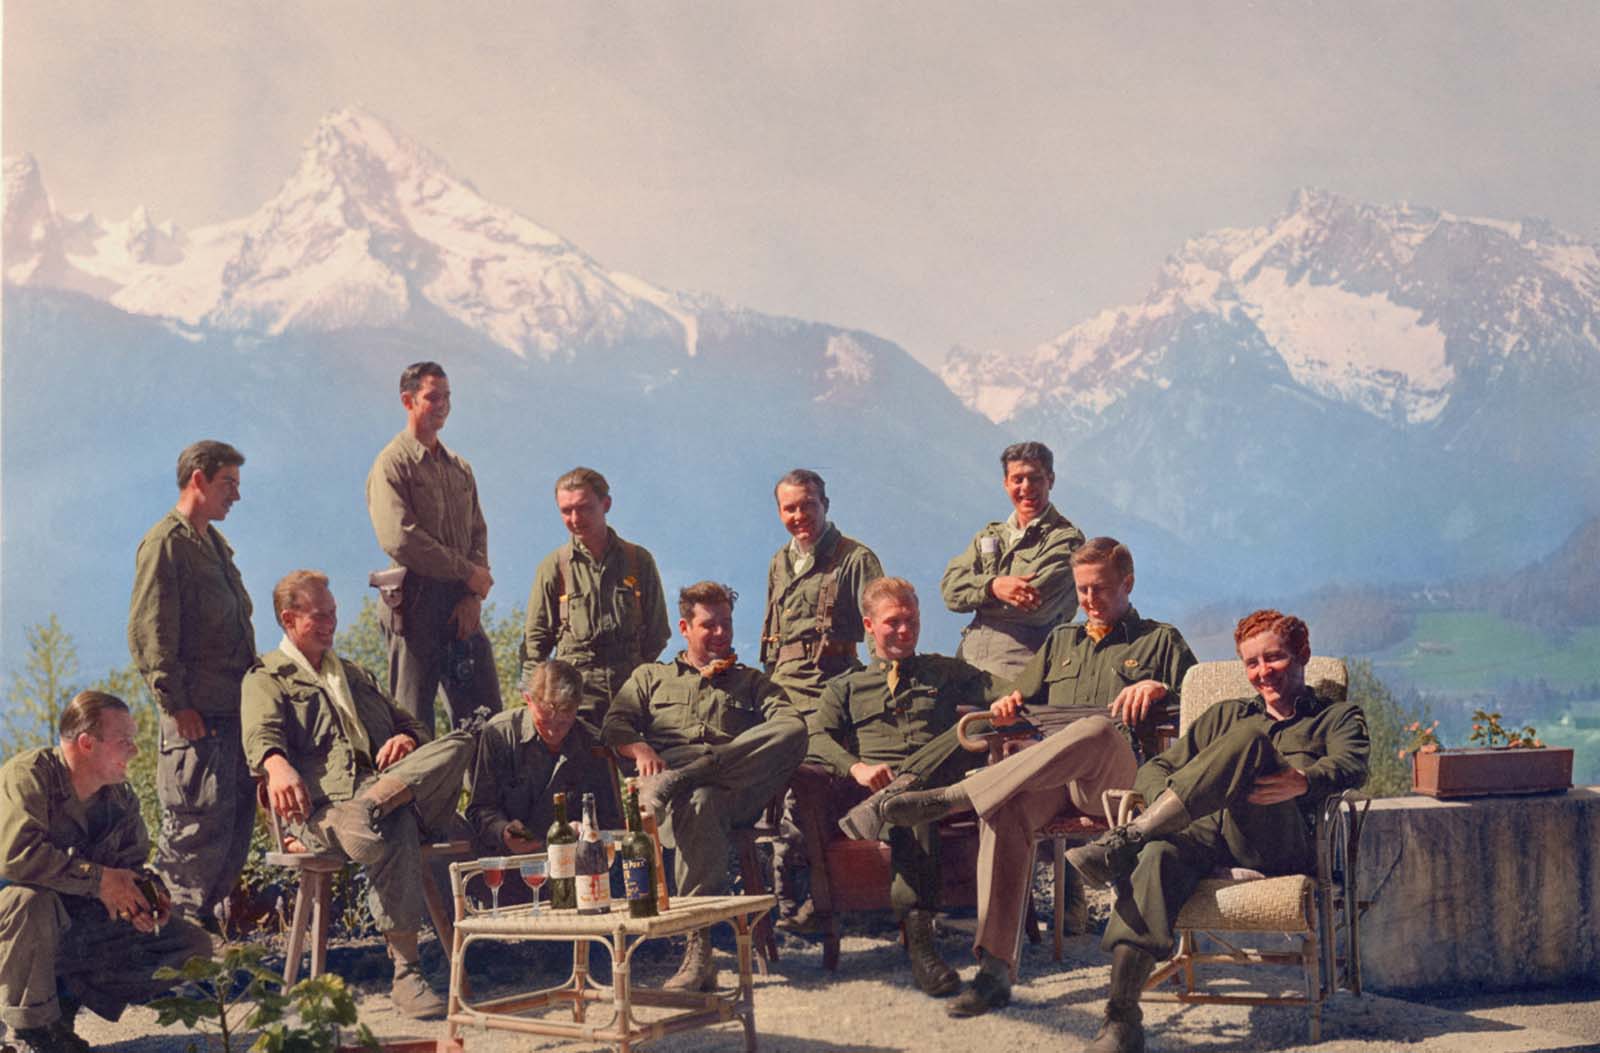 The men of Easy Company of the U.S. Army 101st Airborne at Hitler's 